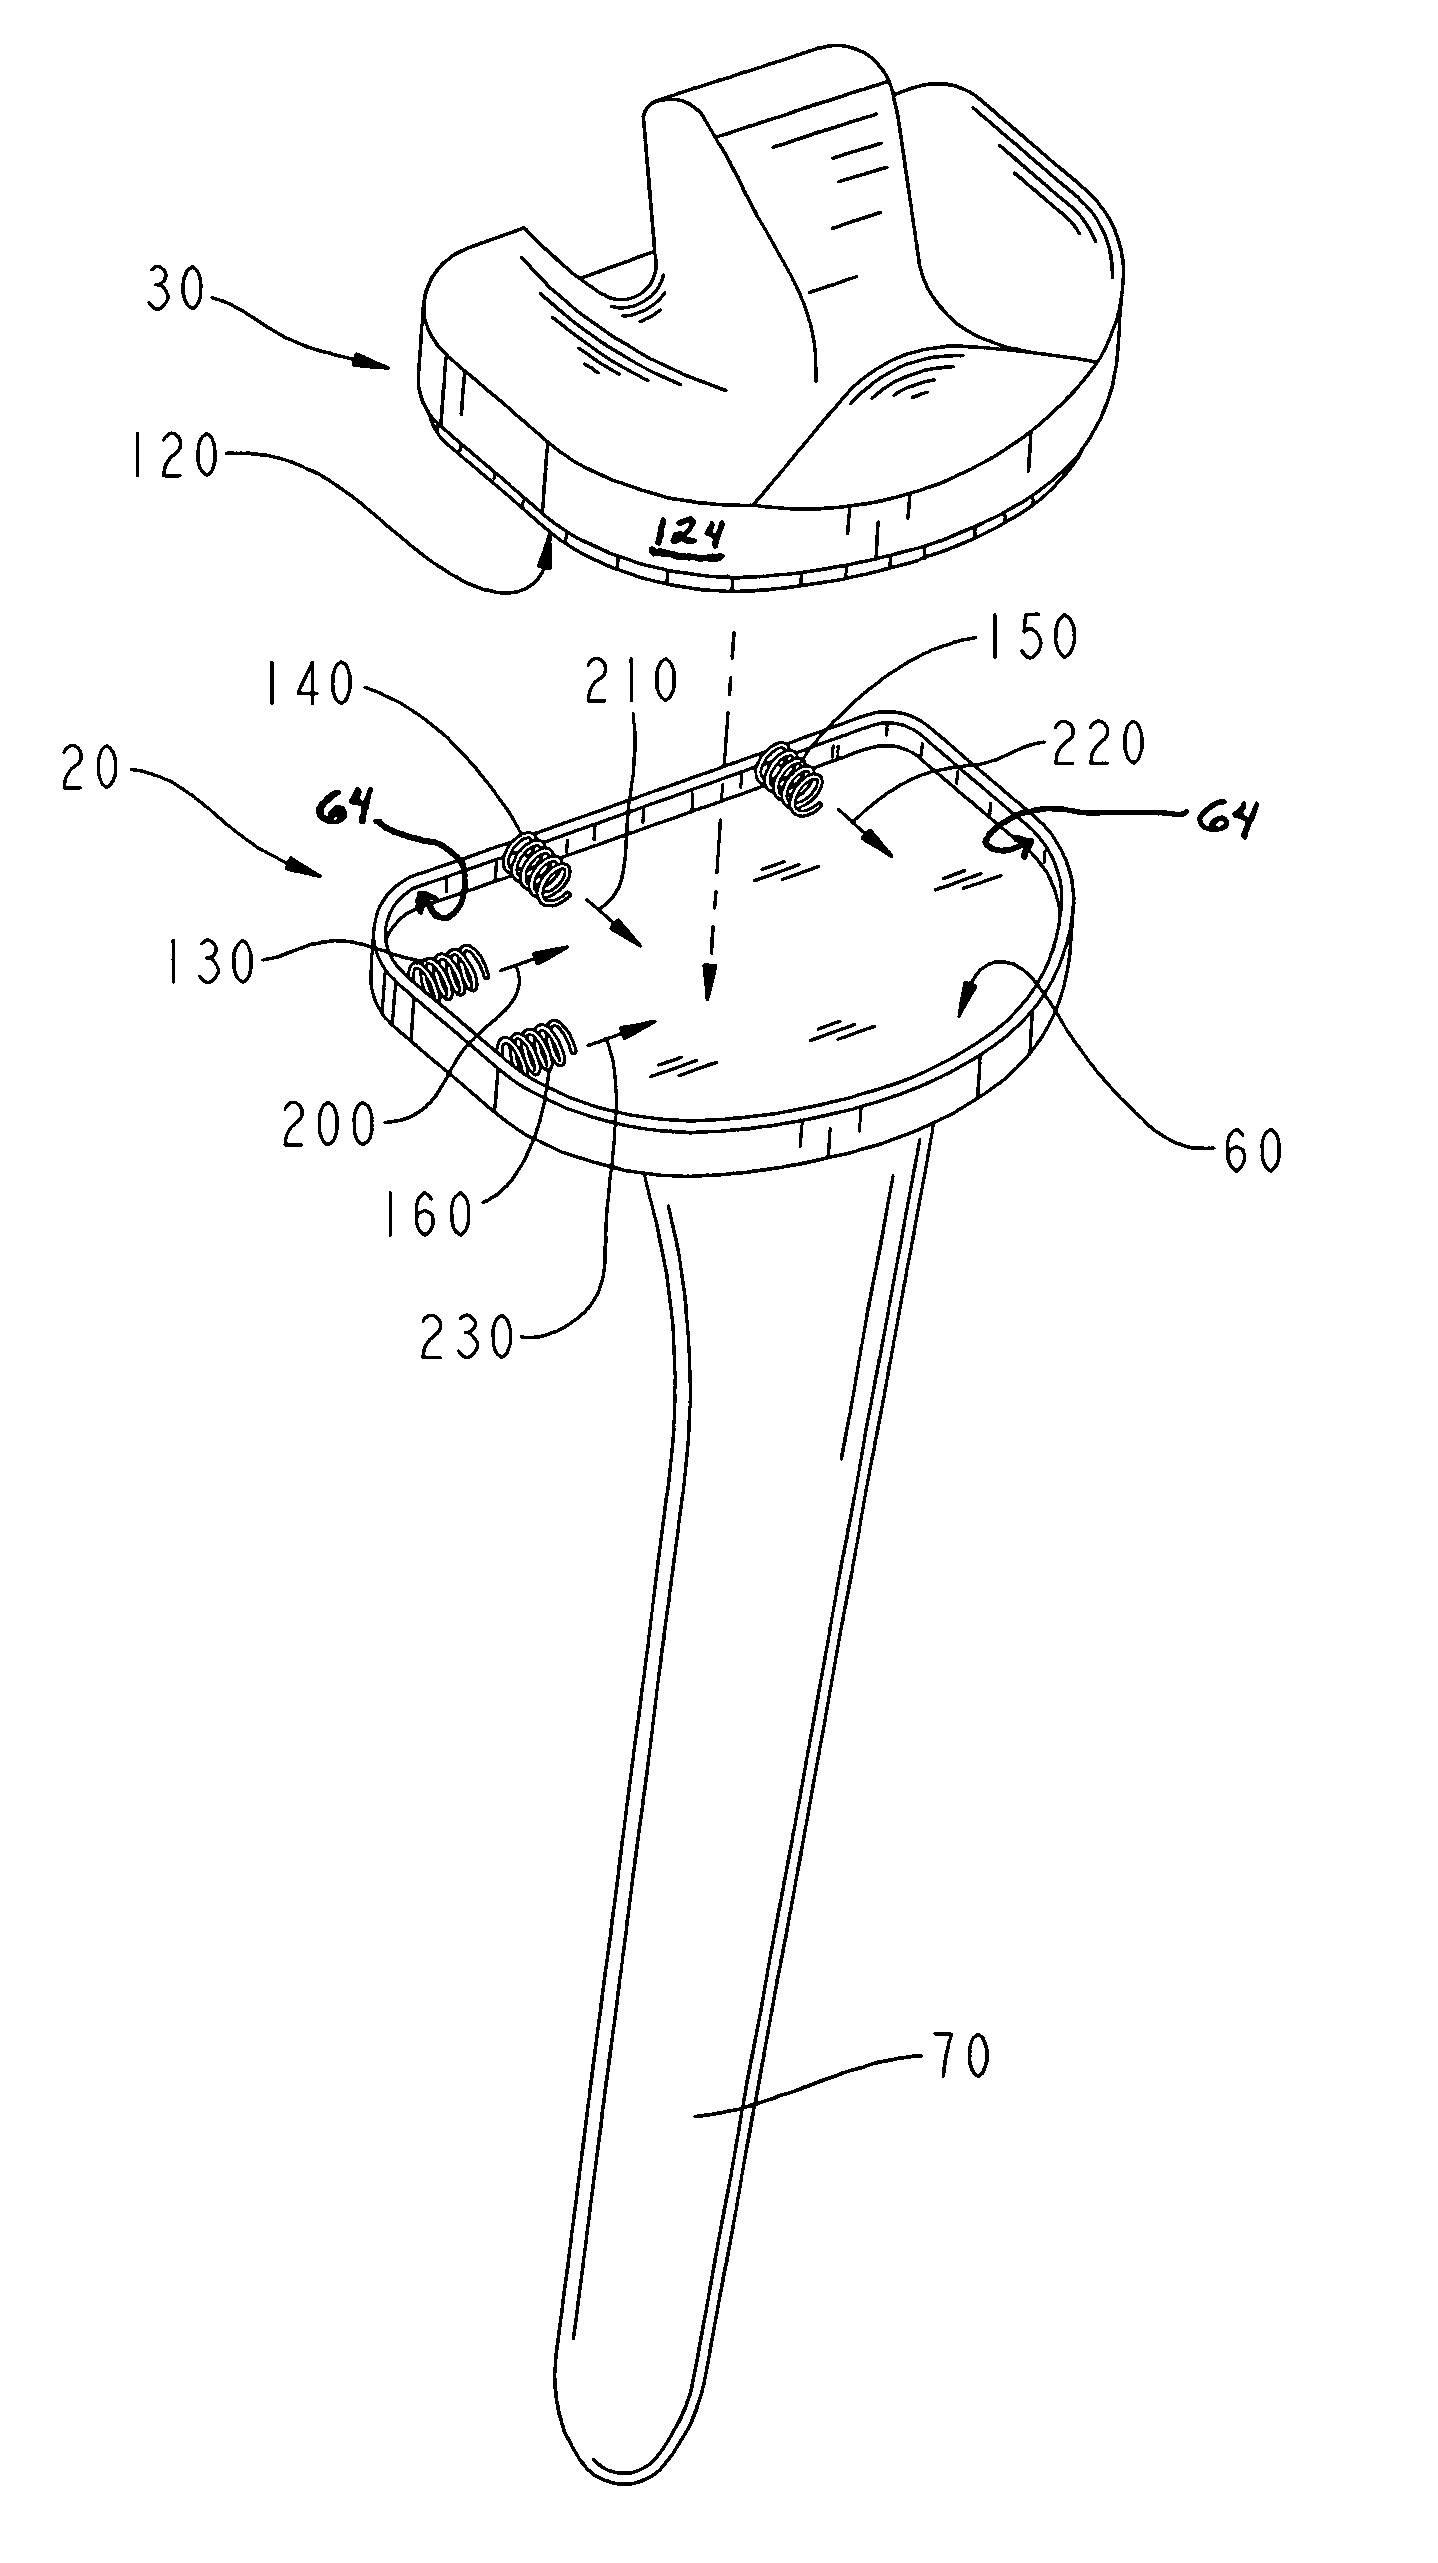 Modular implant with a micro-motion damper